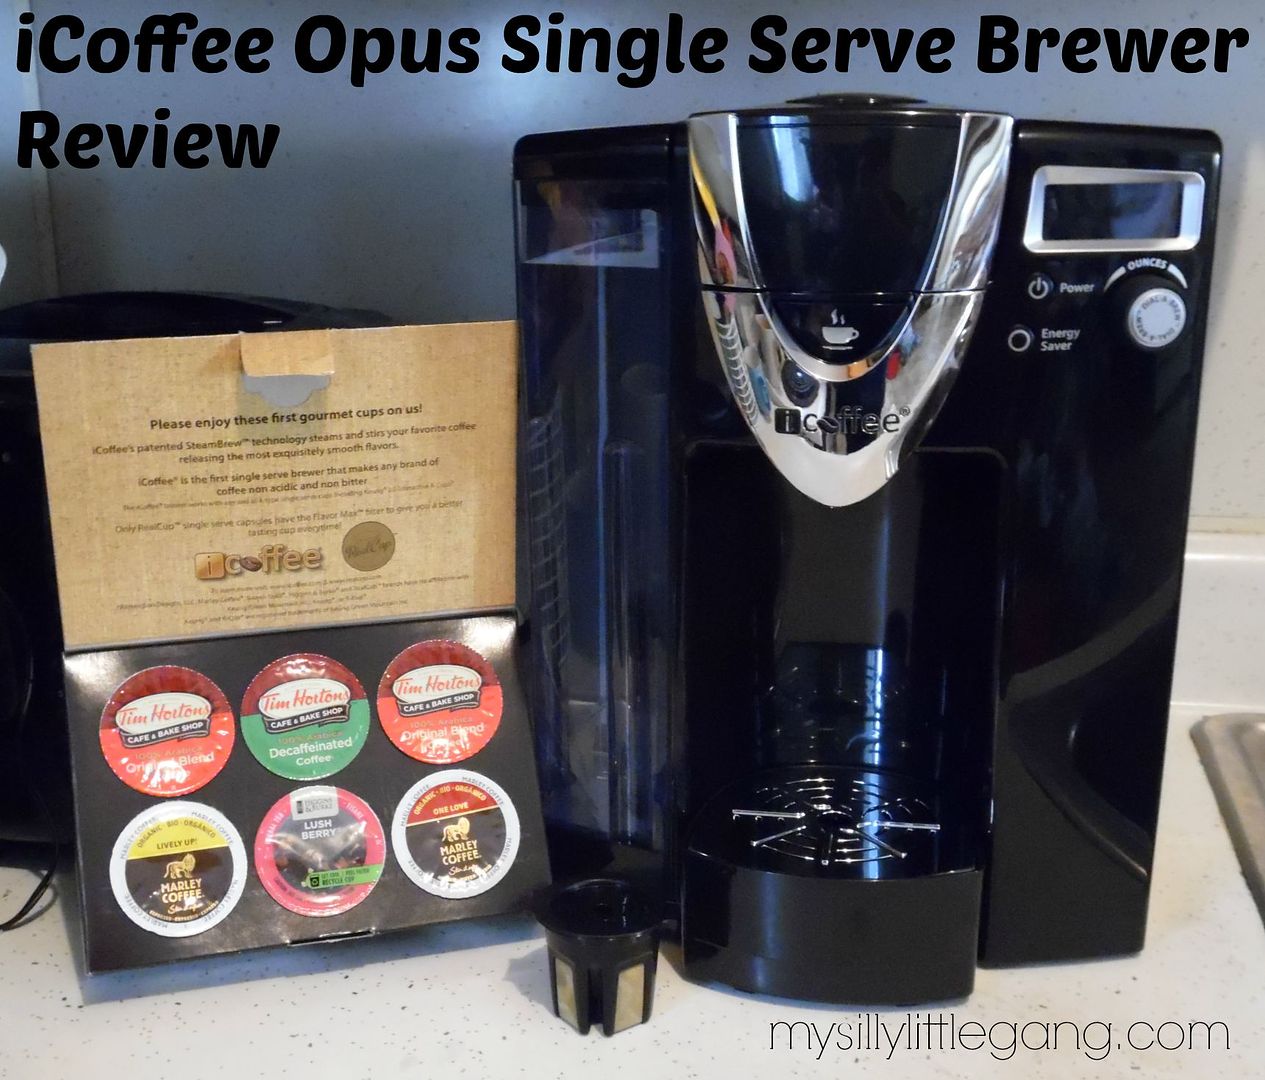 icoffee-opus-review